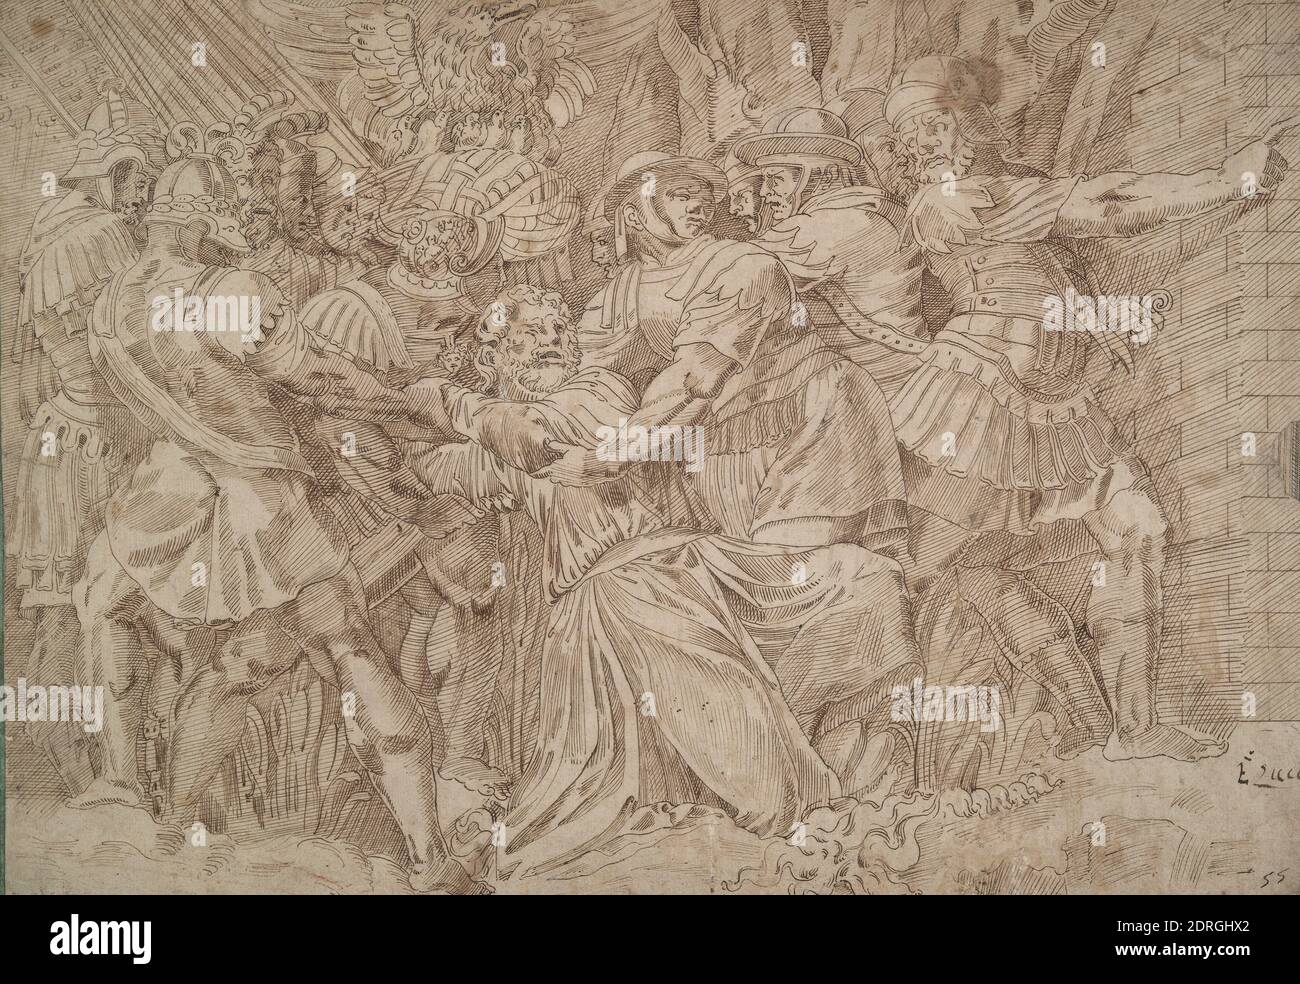 Artist, copy after (?): Polidoro da Caravaggio, Italian, ca. 1499–ca. 1543, Roman Soldiers Arresting an Old Man, 16th century, Pen and brown ink on tan paper, Sheet: 27.1 × 39 cm (10 11/16 × 15 3/8 in.), Made in Italy, Italian, 16th century, Works on Paper - Drawings and Watercolors Stock Photo